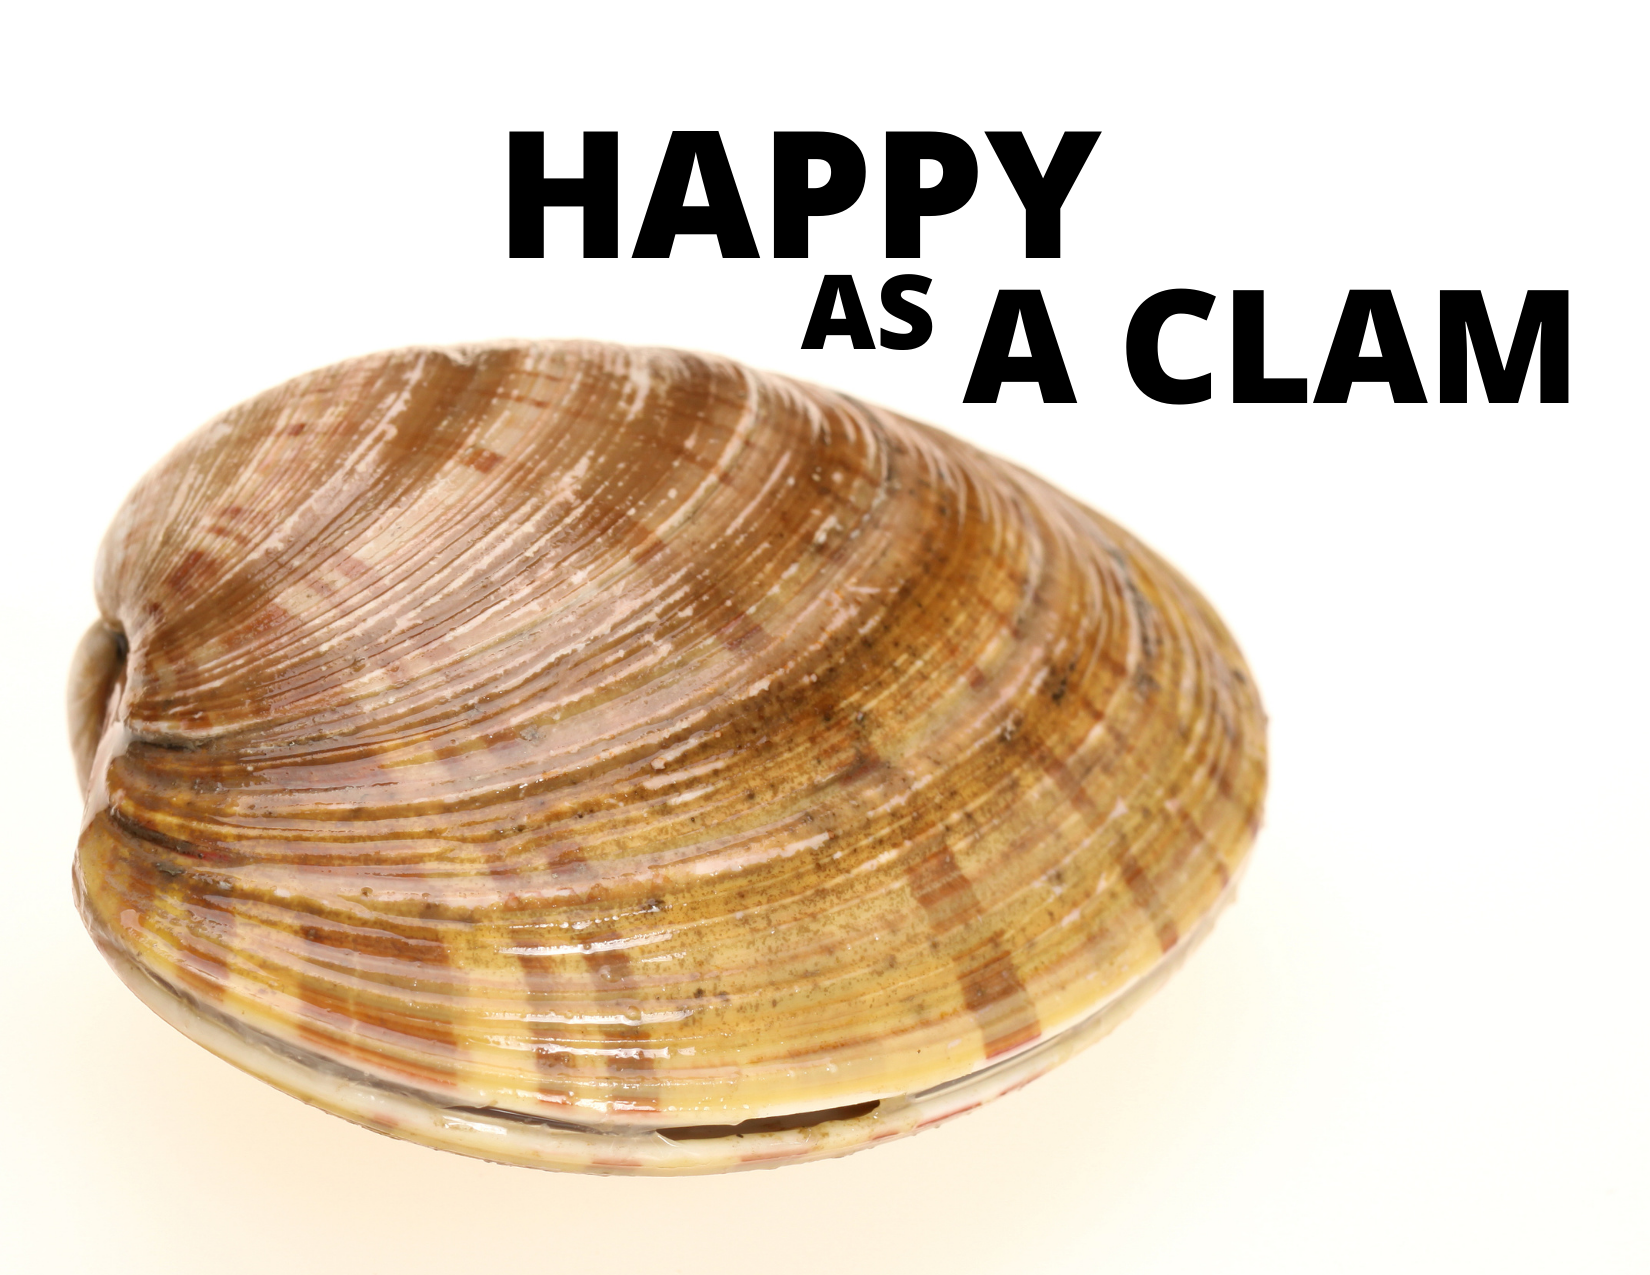 A picture of a clam with the words "Happy as a clam"